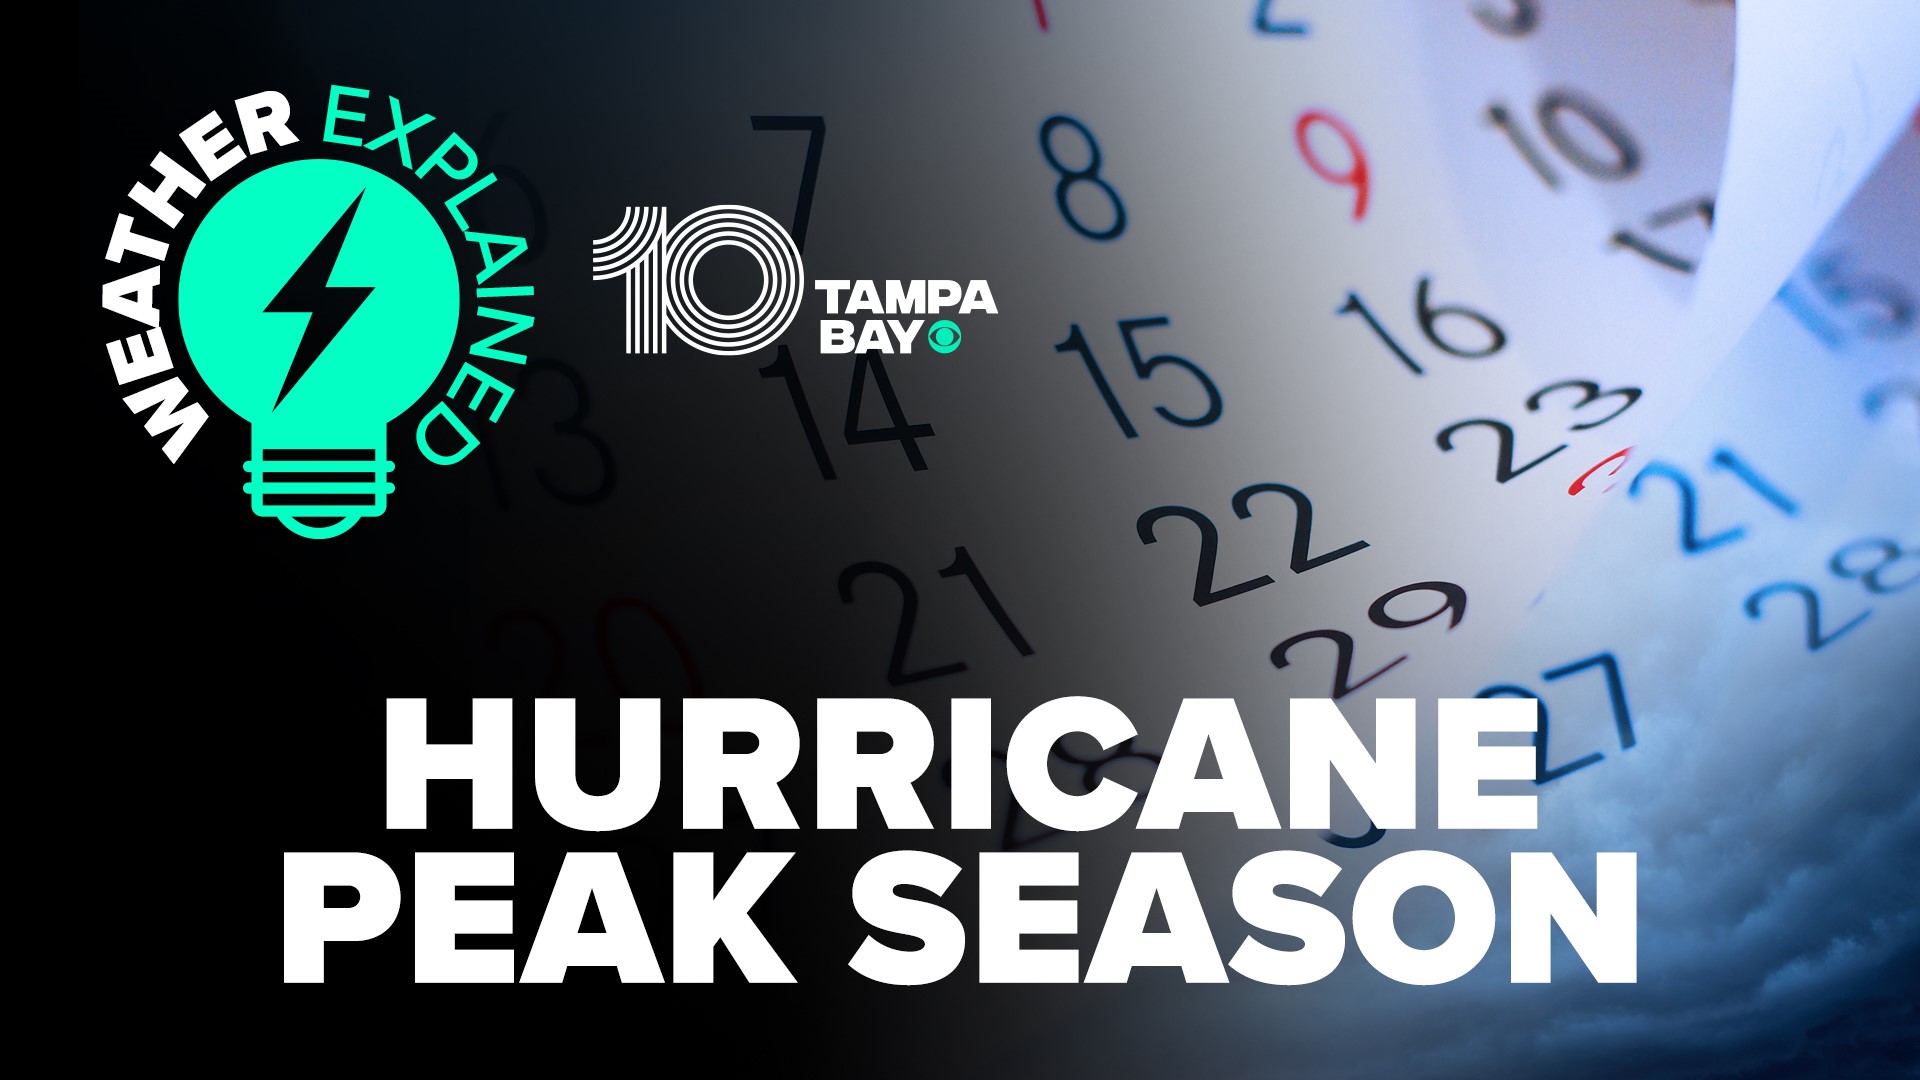 The Atlantic hurricane season is June 1 - Nov. 30. Chief Meteorologist Bobby Deskins explains when hurricanes are most frequent in that timeframe.